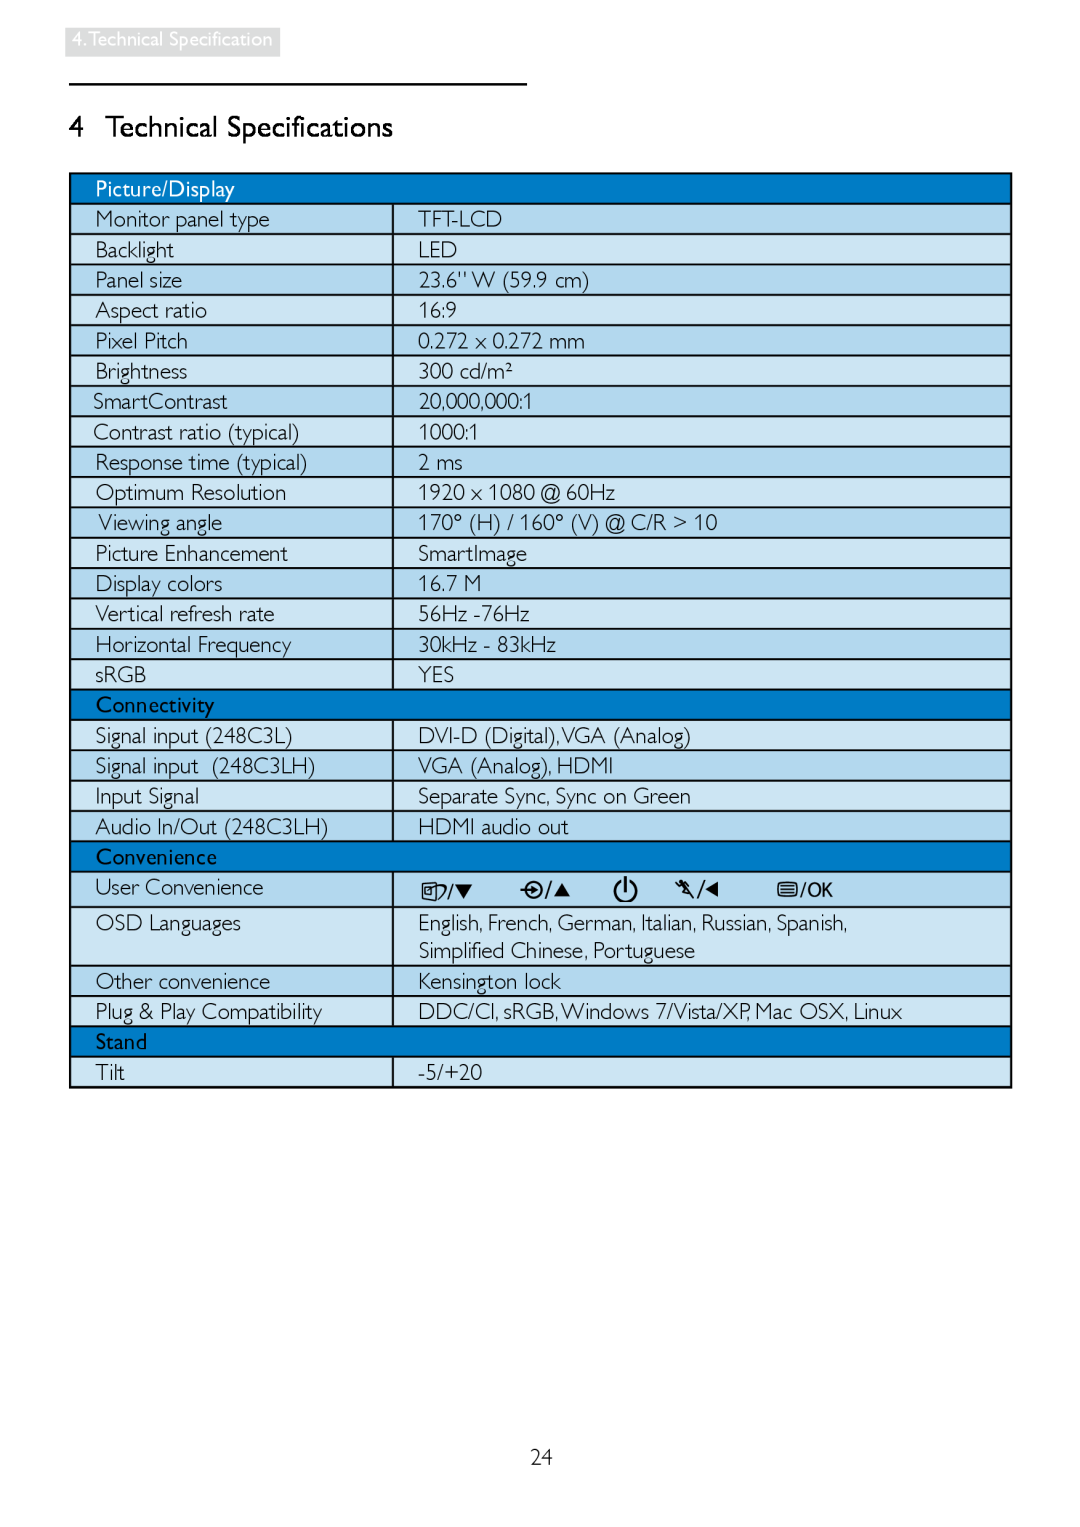 Philips 248C3L user manual Technical Specifications, Picture/Display 